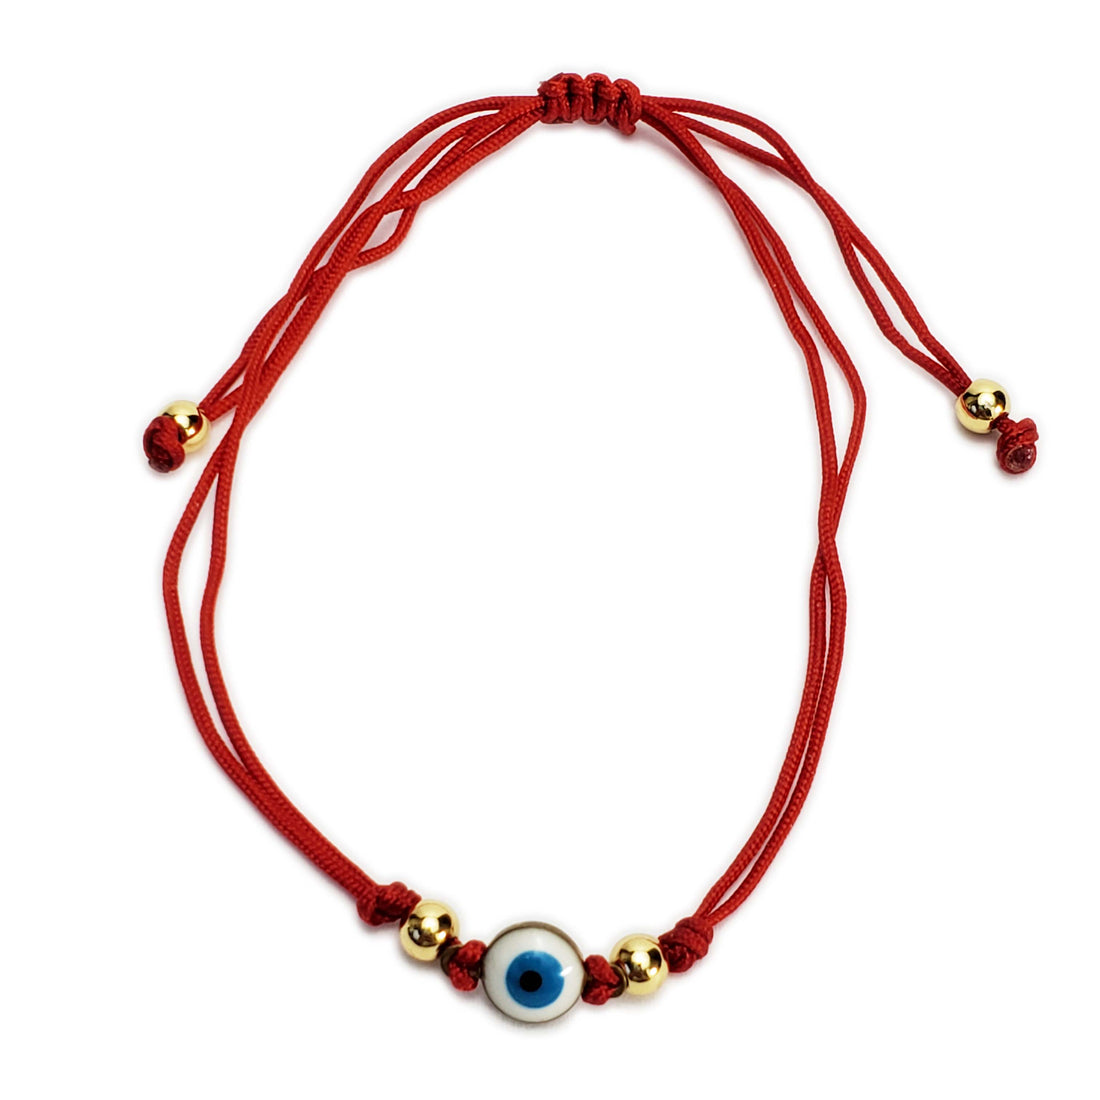 Evil Eye Protection Amulet House of Intuition White Eye 